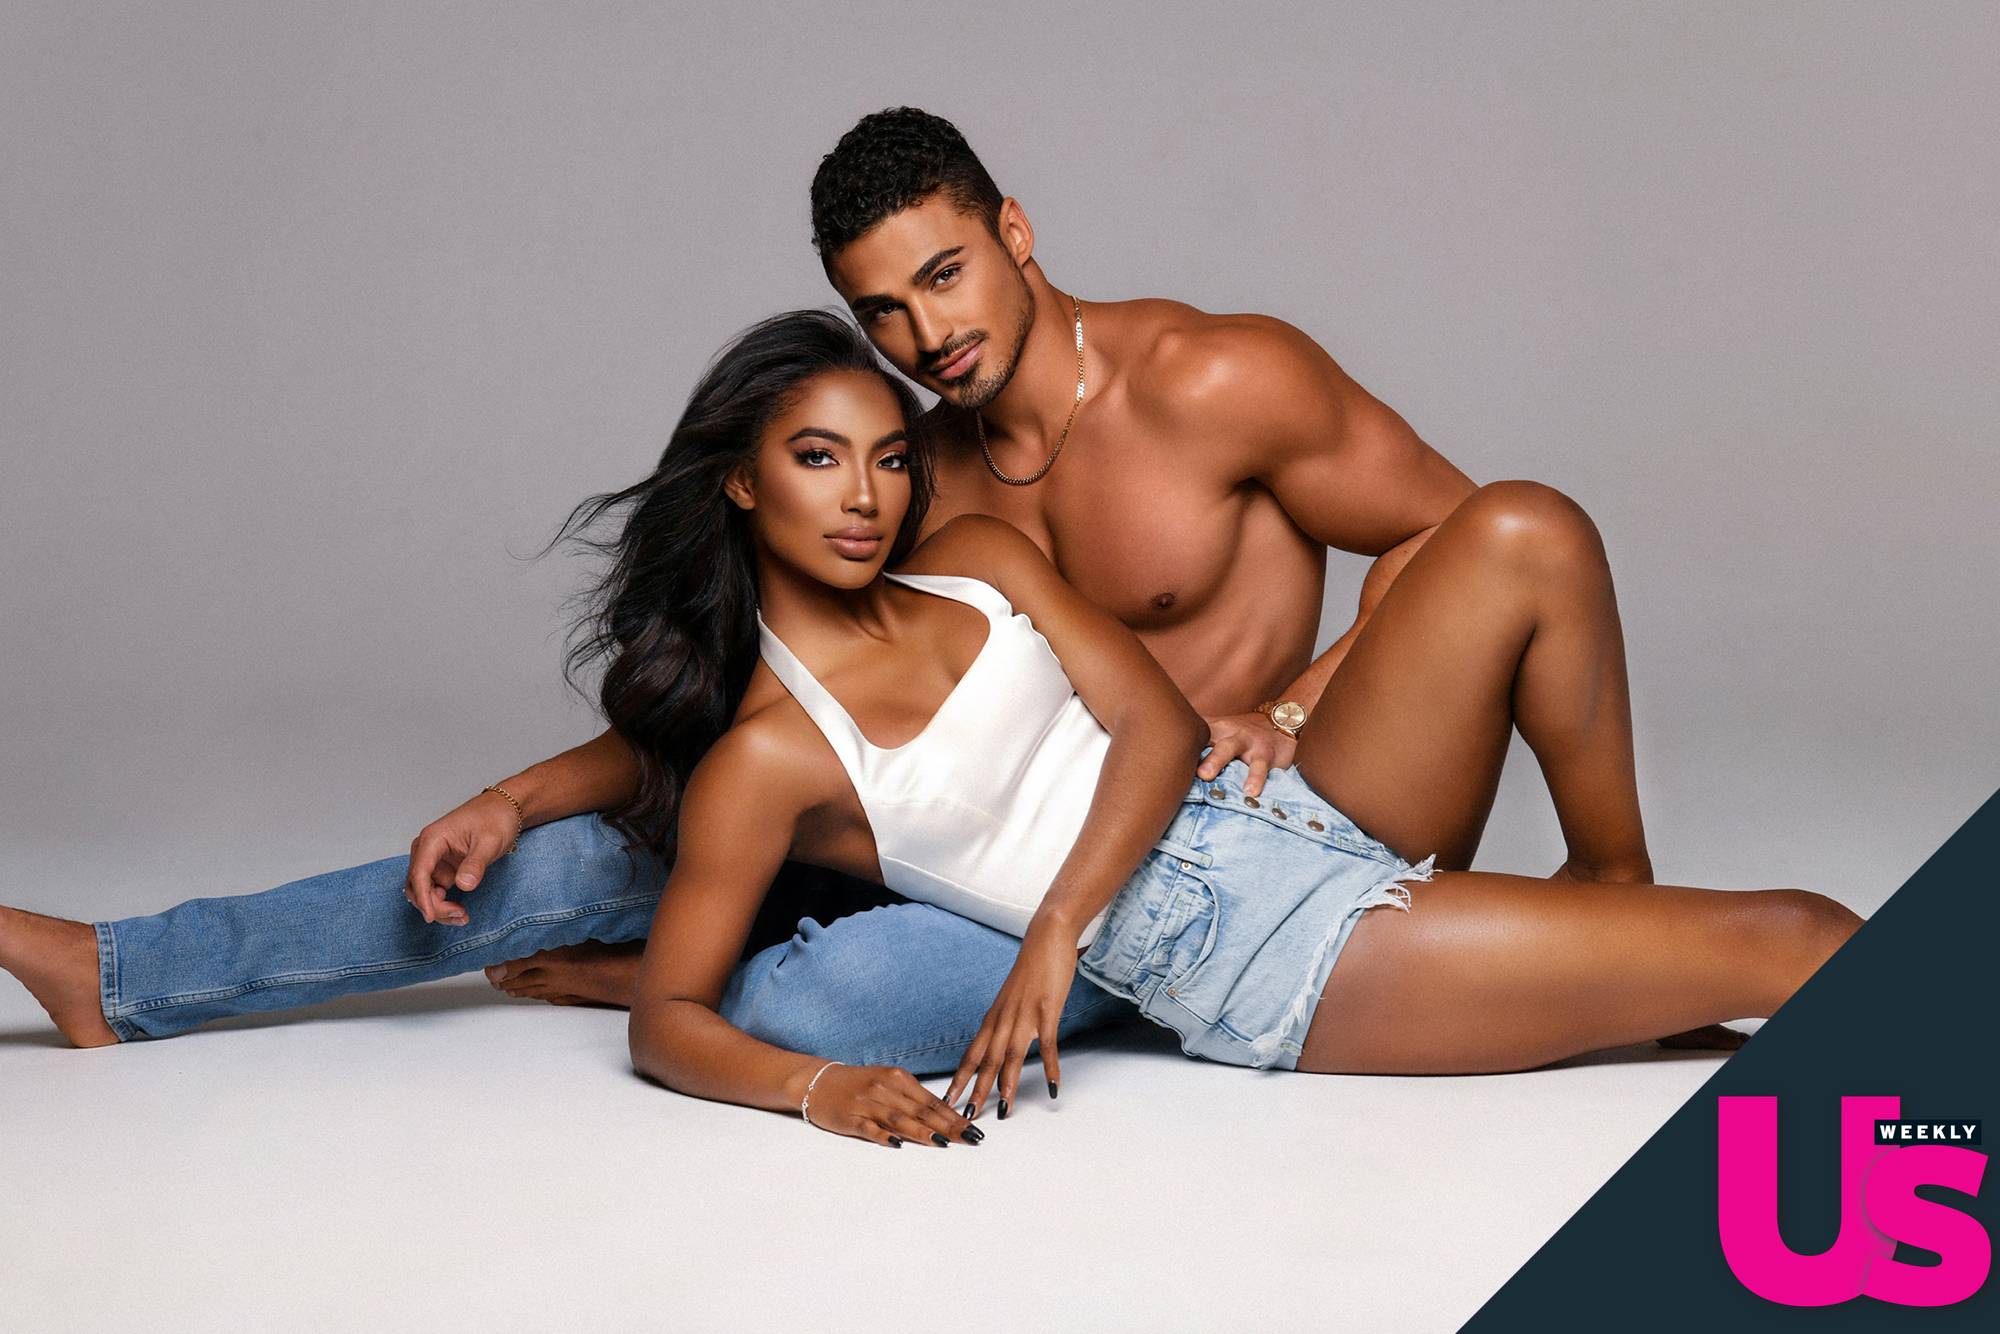 Bp Bp Sexy Sexy Sex - Big Brother's Taylor and Joseph Pose for Sexy Anniversary Photos | Us Weekly